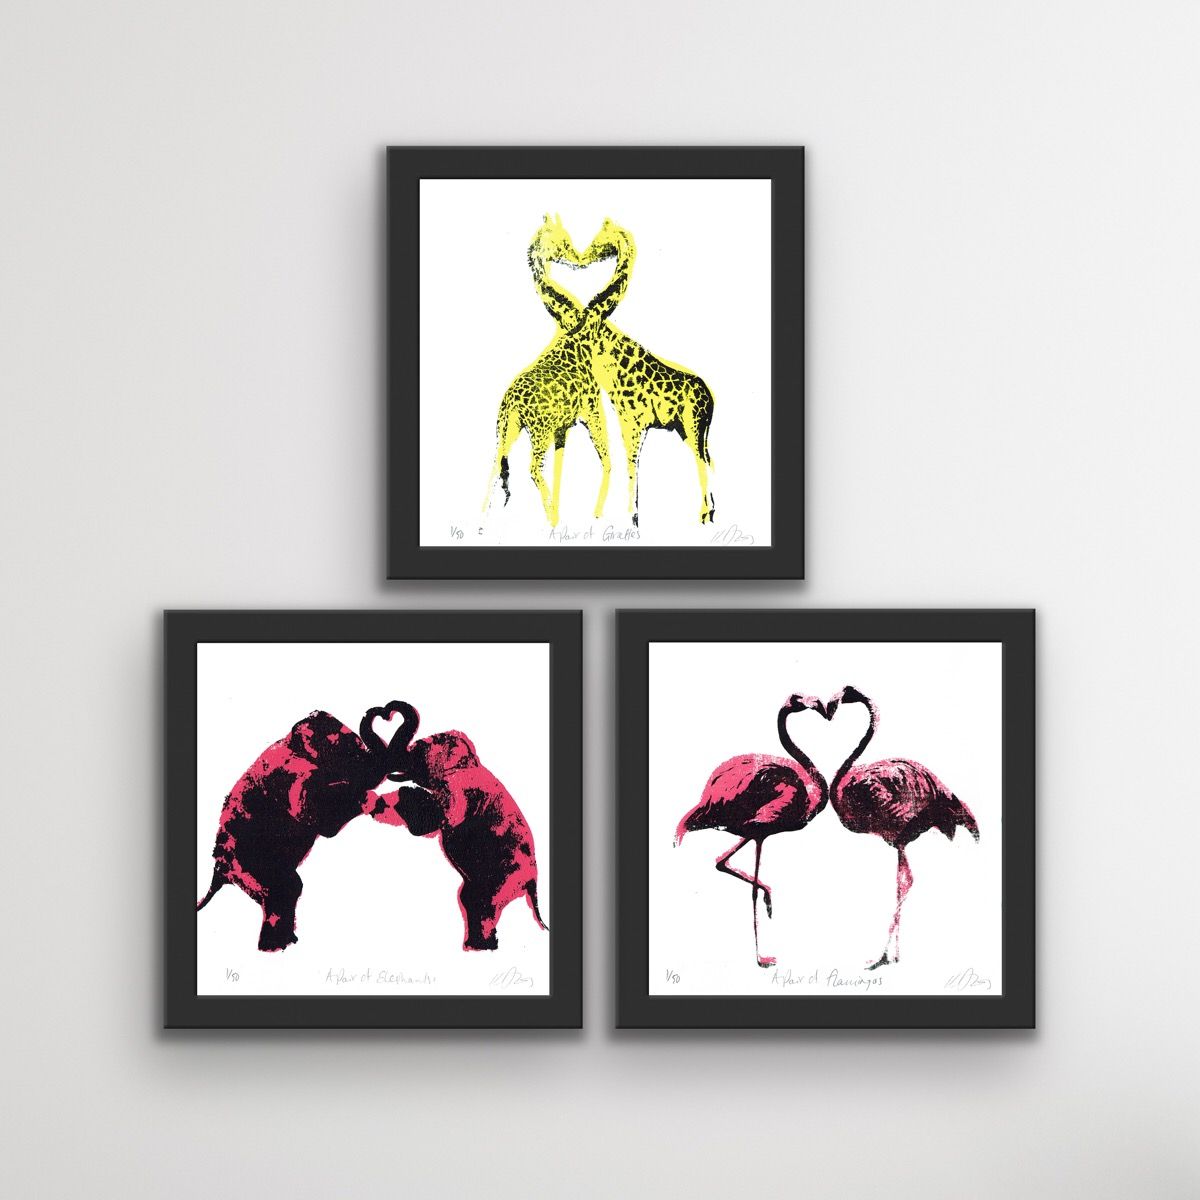 A Pair of Flamingos, A Pair of Giraffes and A Pair of Elephants by Katie Edwards